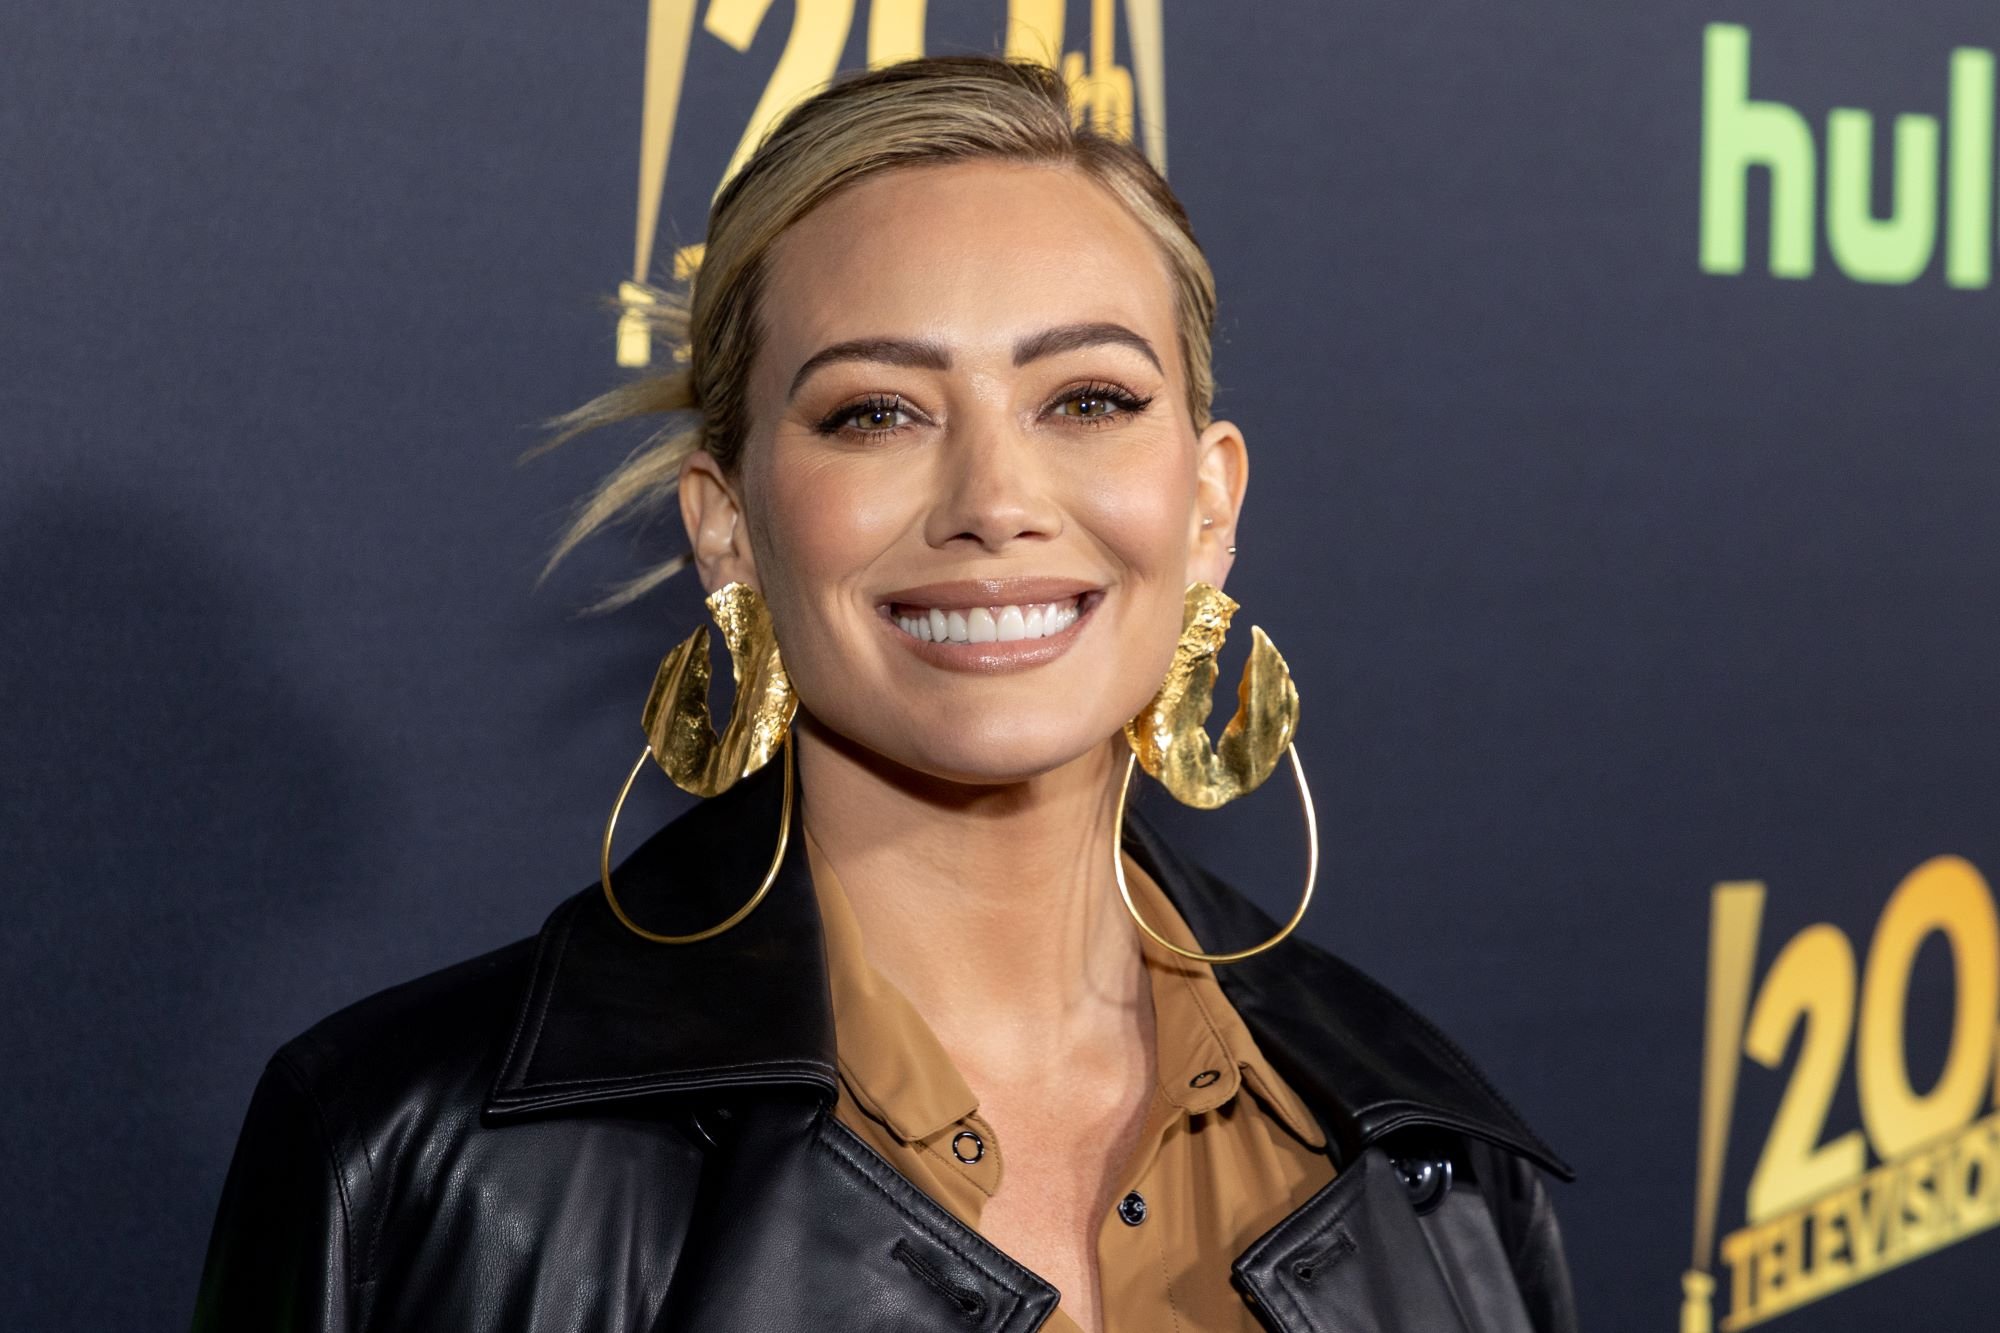 Hilary Duff, who stars in 'How I Met Your Father' Season 2, wears a black leather jacket over a light brown shirt and gold dangly earrings.